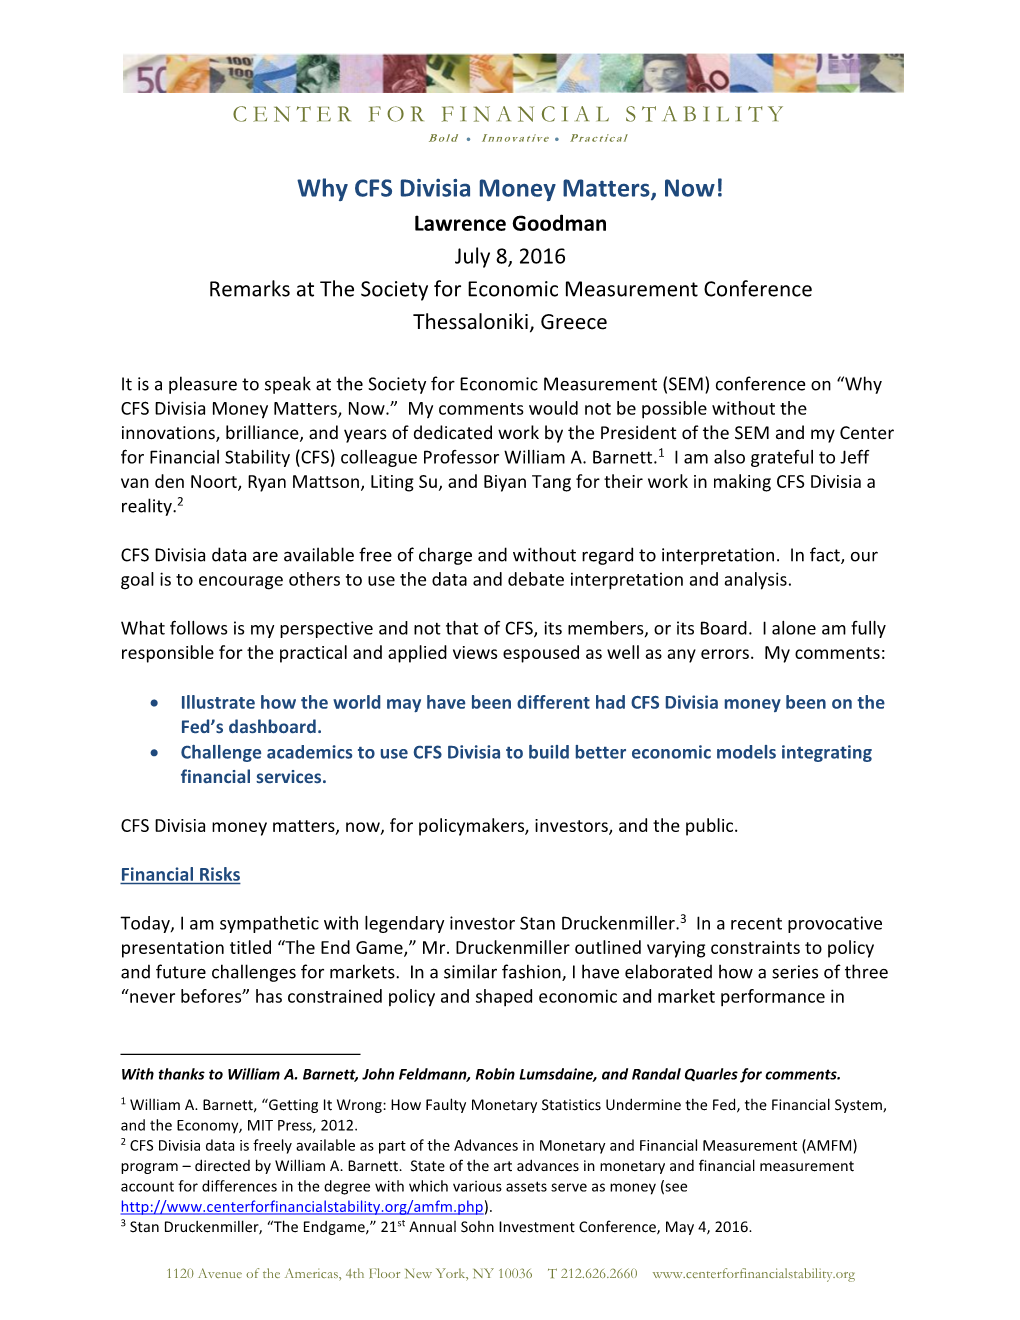 Why CFS Divisia Money Matters, Now! Lawrence Goodman July 8, 2016 Remarks at the Society for Economic Measurement Conference Thessaloniki, Greece